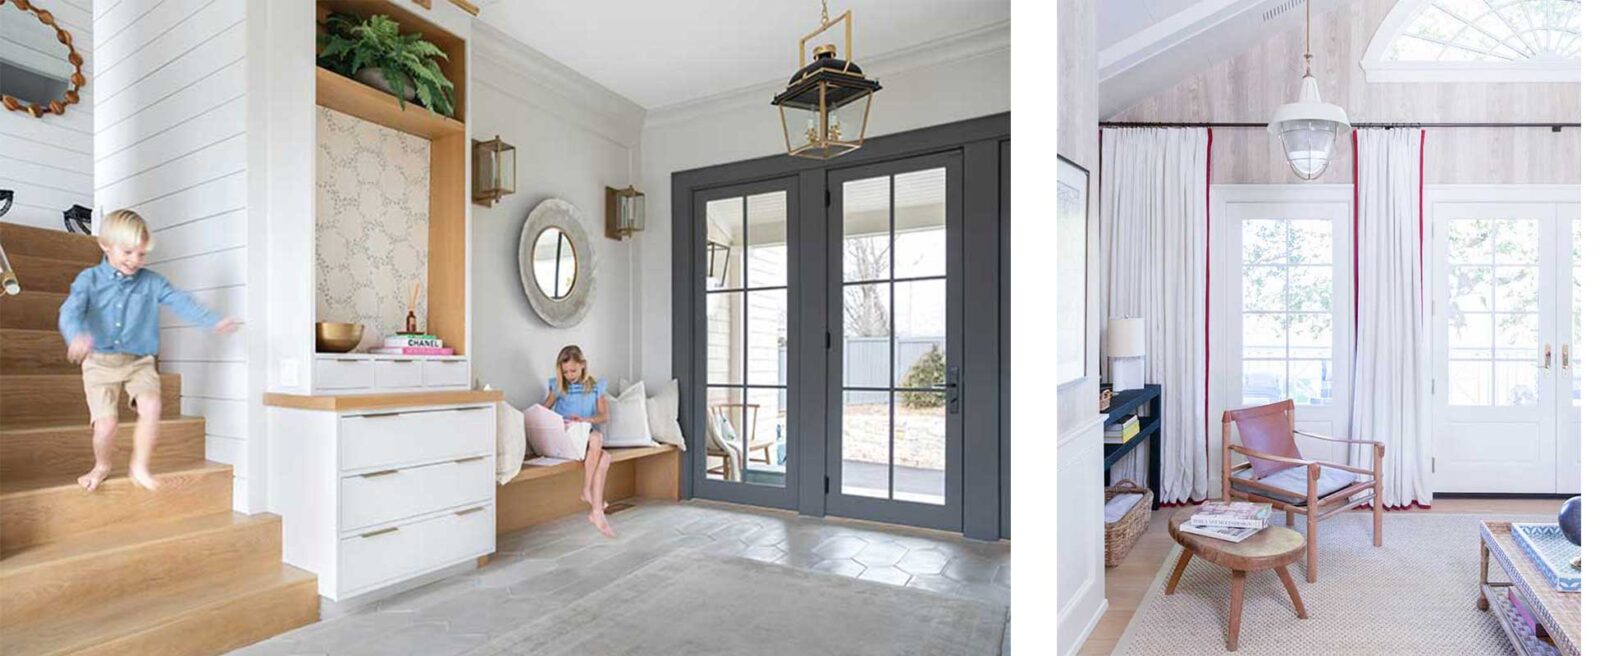 MARVIN® Door Types are available at Westside Door: Orange County, Southern California MARVIN® Authorized Dealer. Westside Door serves West Los Angeles and the Southern California area. Also serving Orange County, South Bay, Beverly Hills, Malibu, West Los Angeles and all of Southern California. Call us: (310) 478-0311